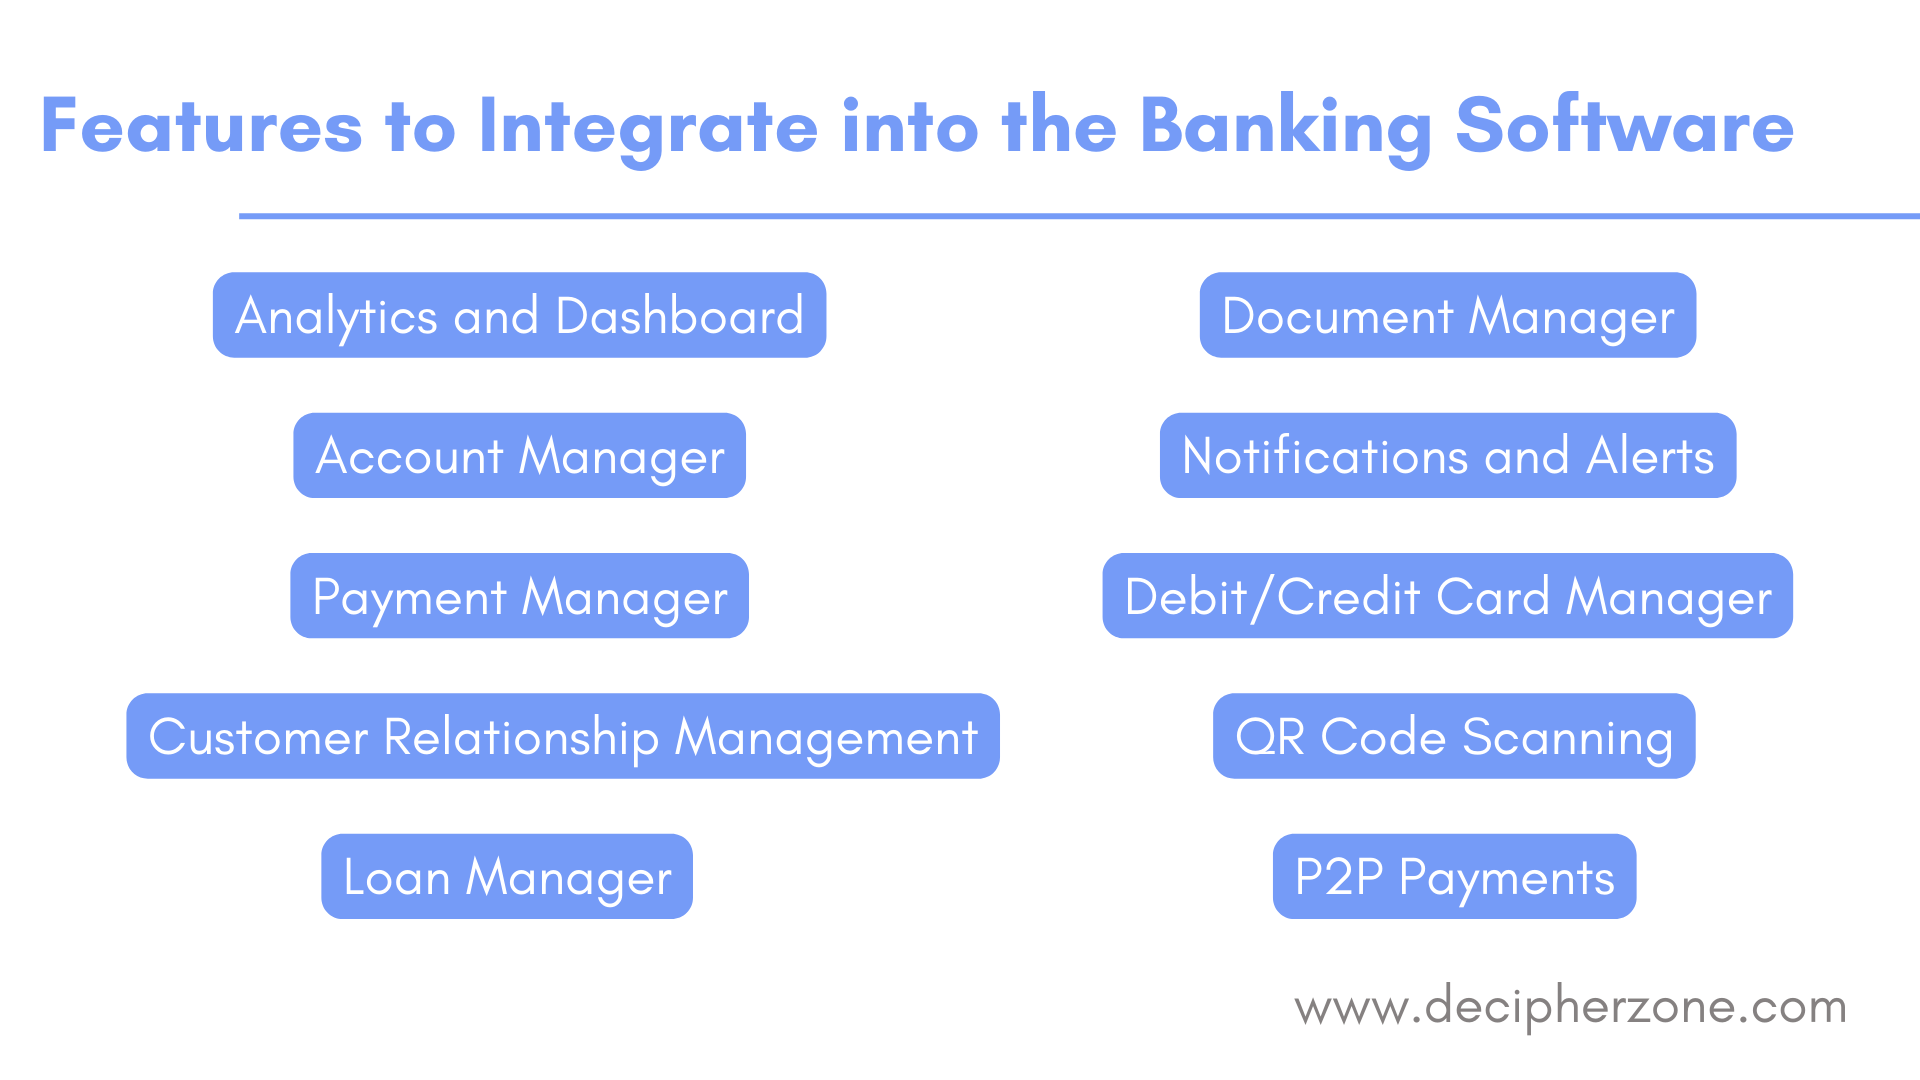 Top 10 Features to Integrate into Banking Software